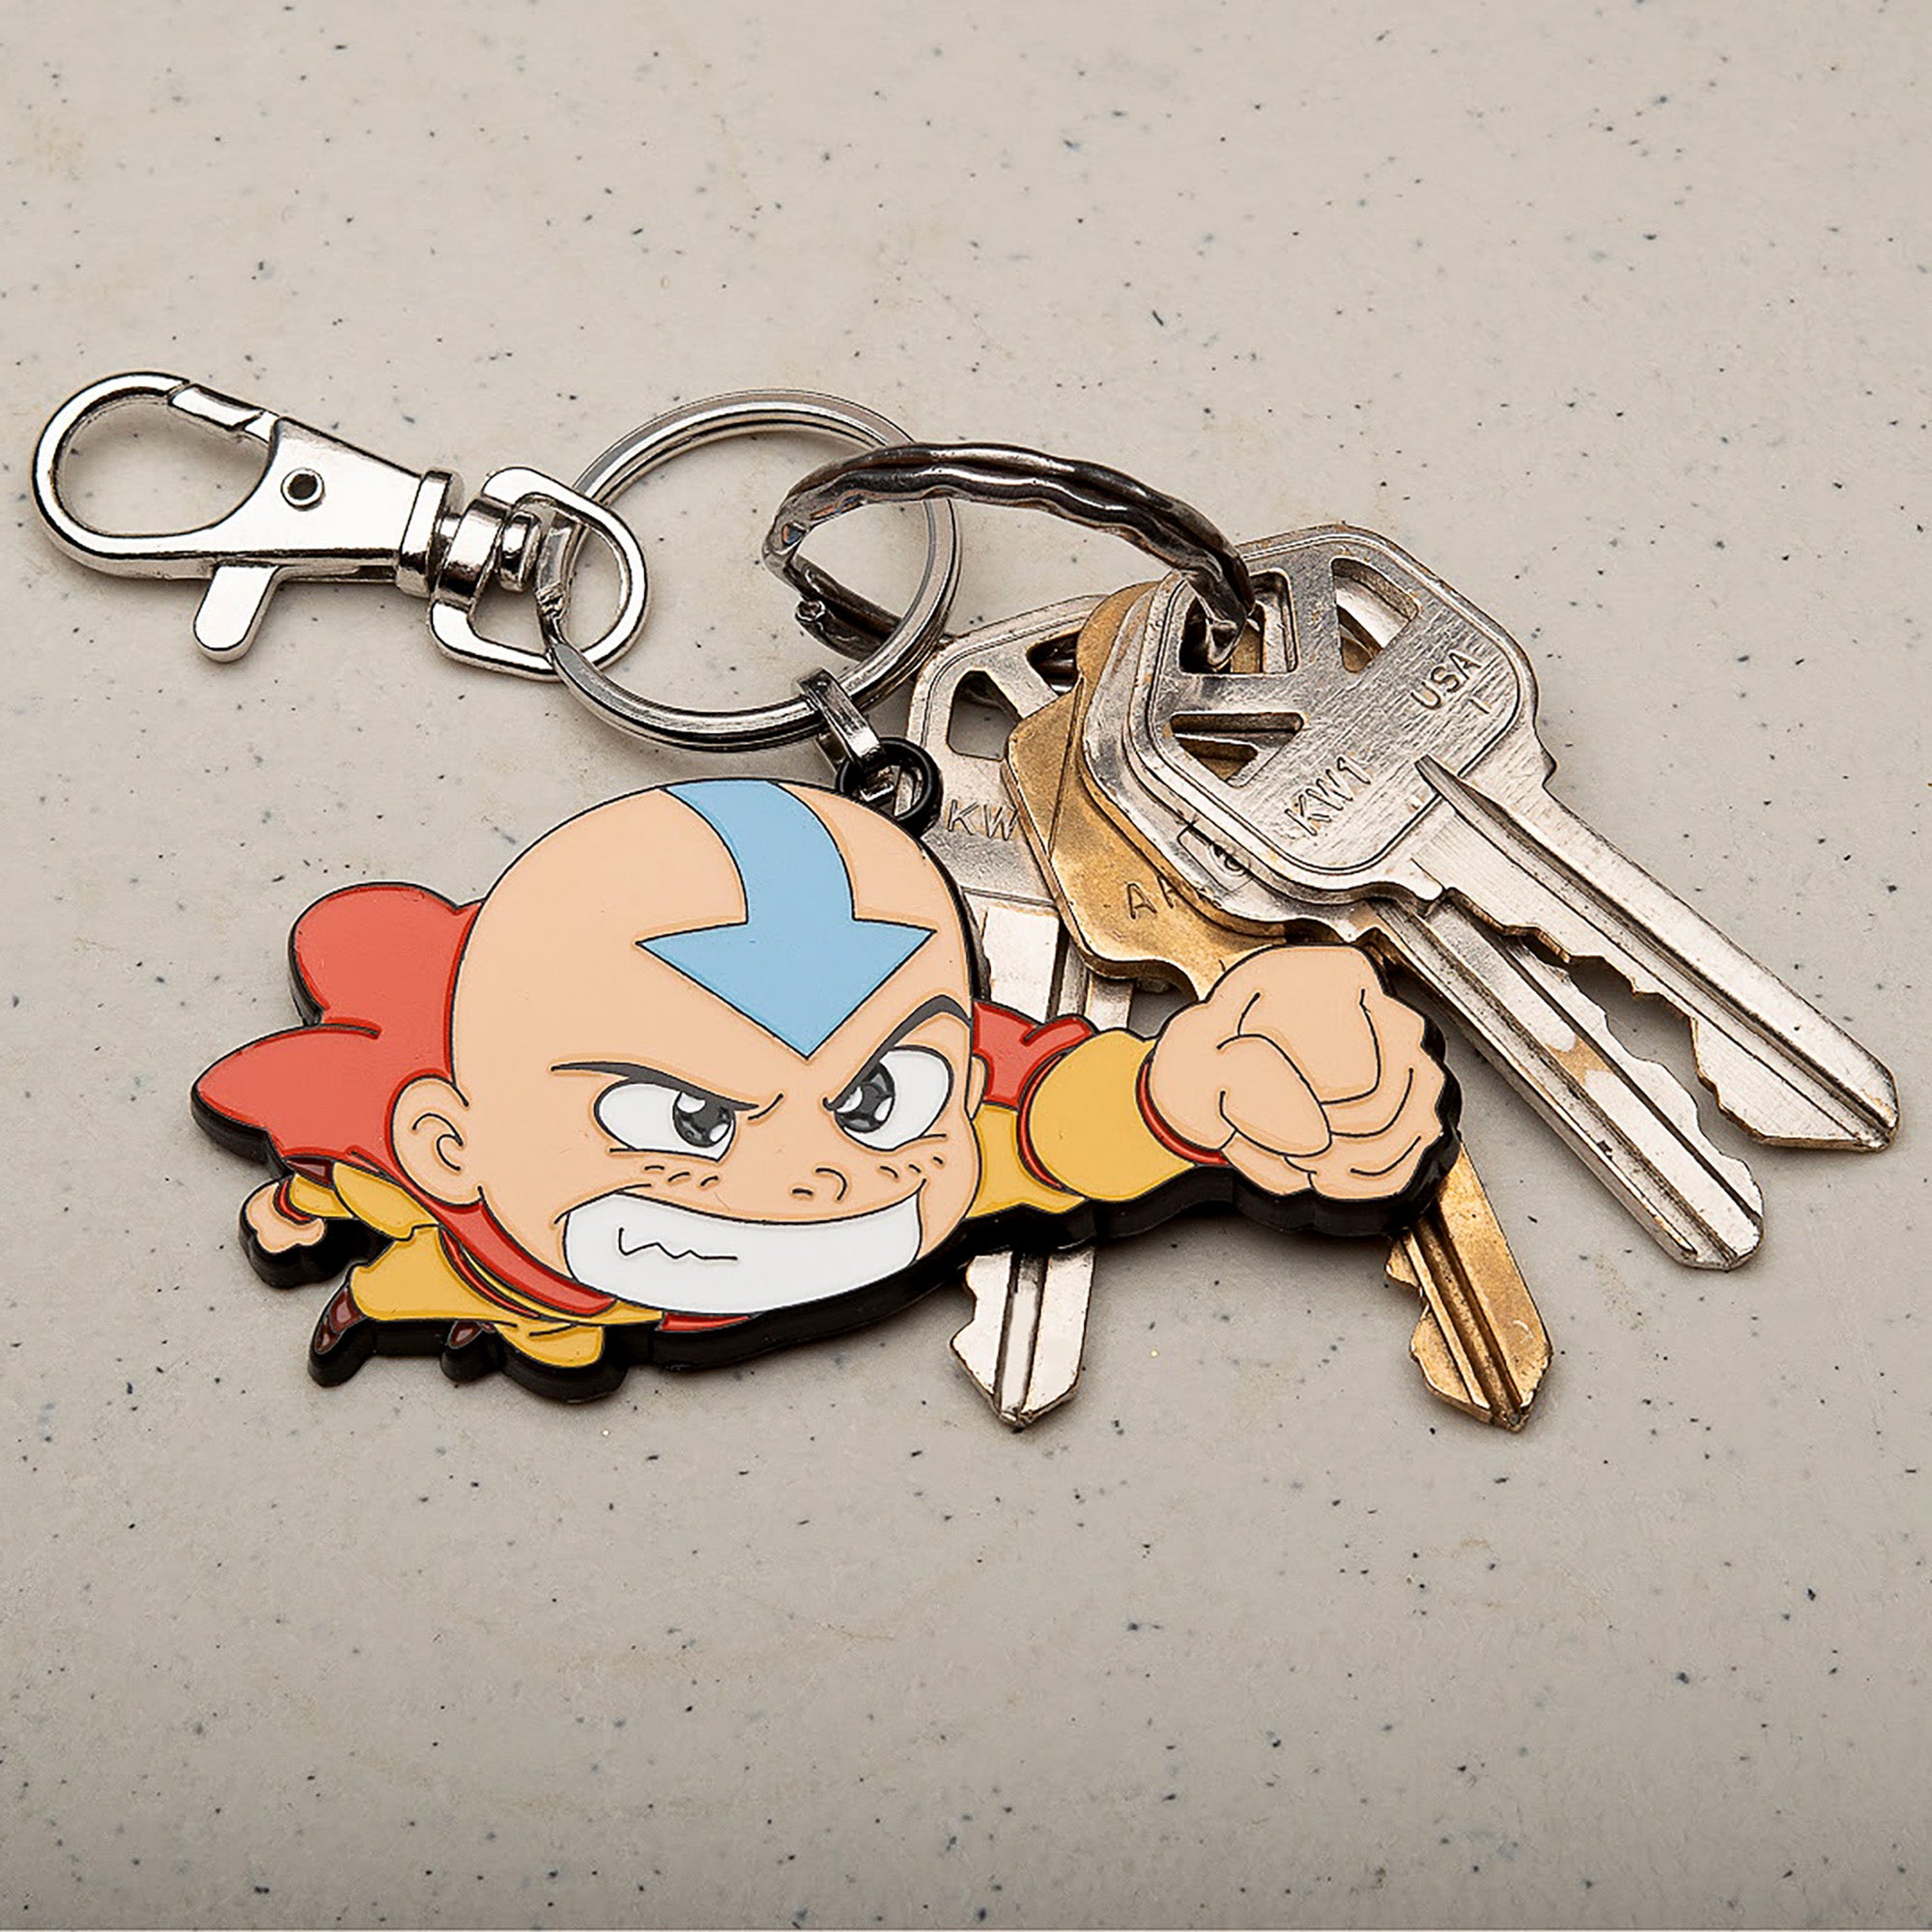 Nickelodeon's Avatar: The Last Airbender Flying Chibi Aang Keychain